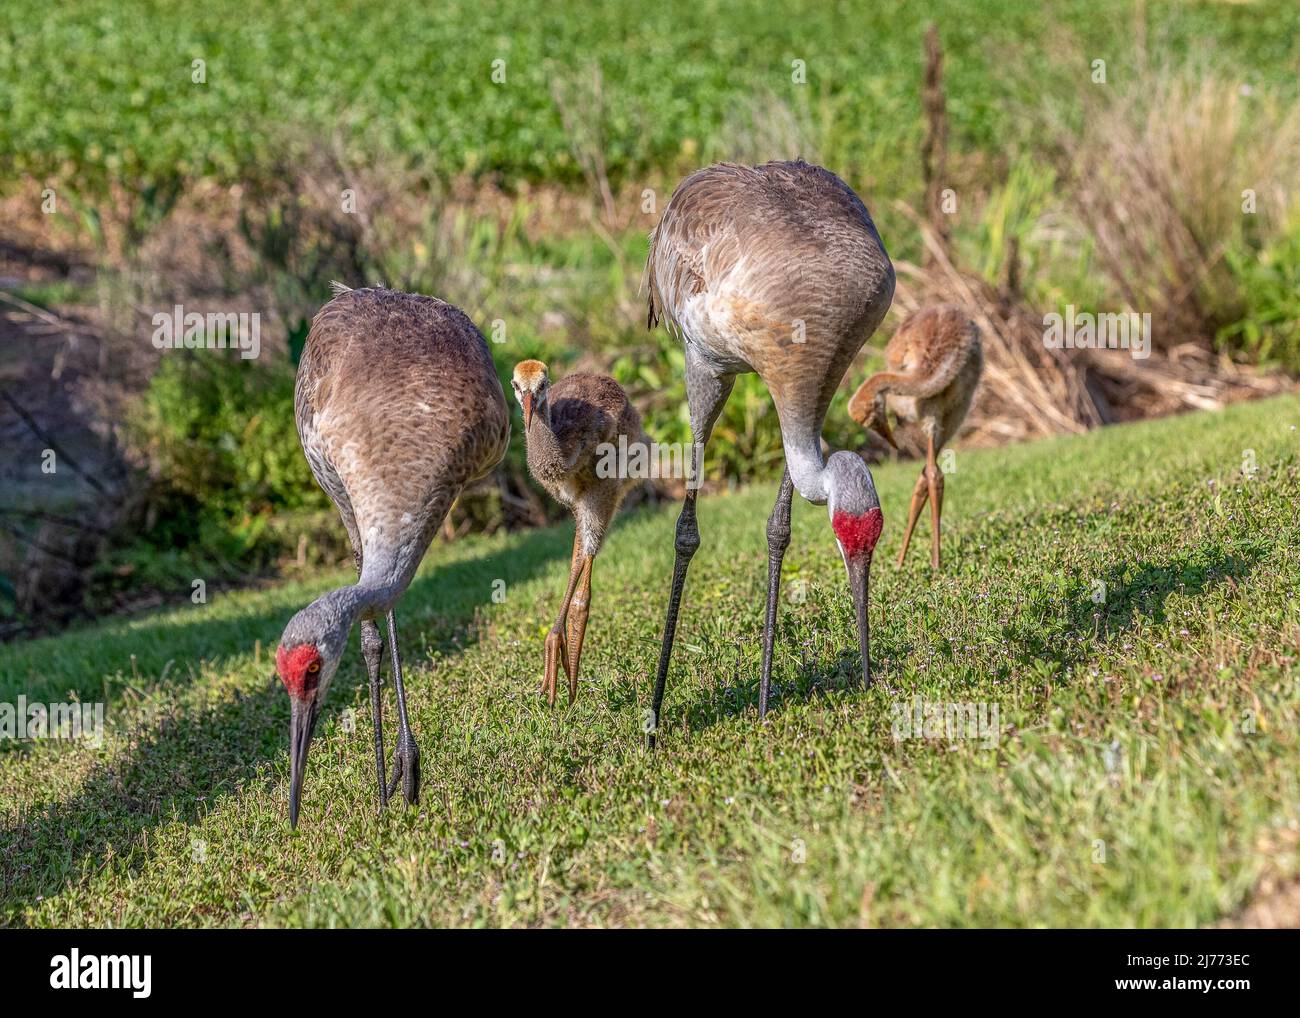 A family of Sanhill cranes feeding along the ponds at Sweetwater wetlands park in Gainesville, Florida Stock Photo